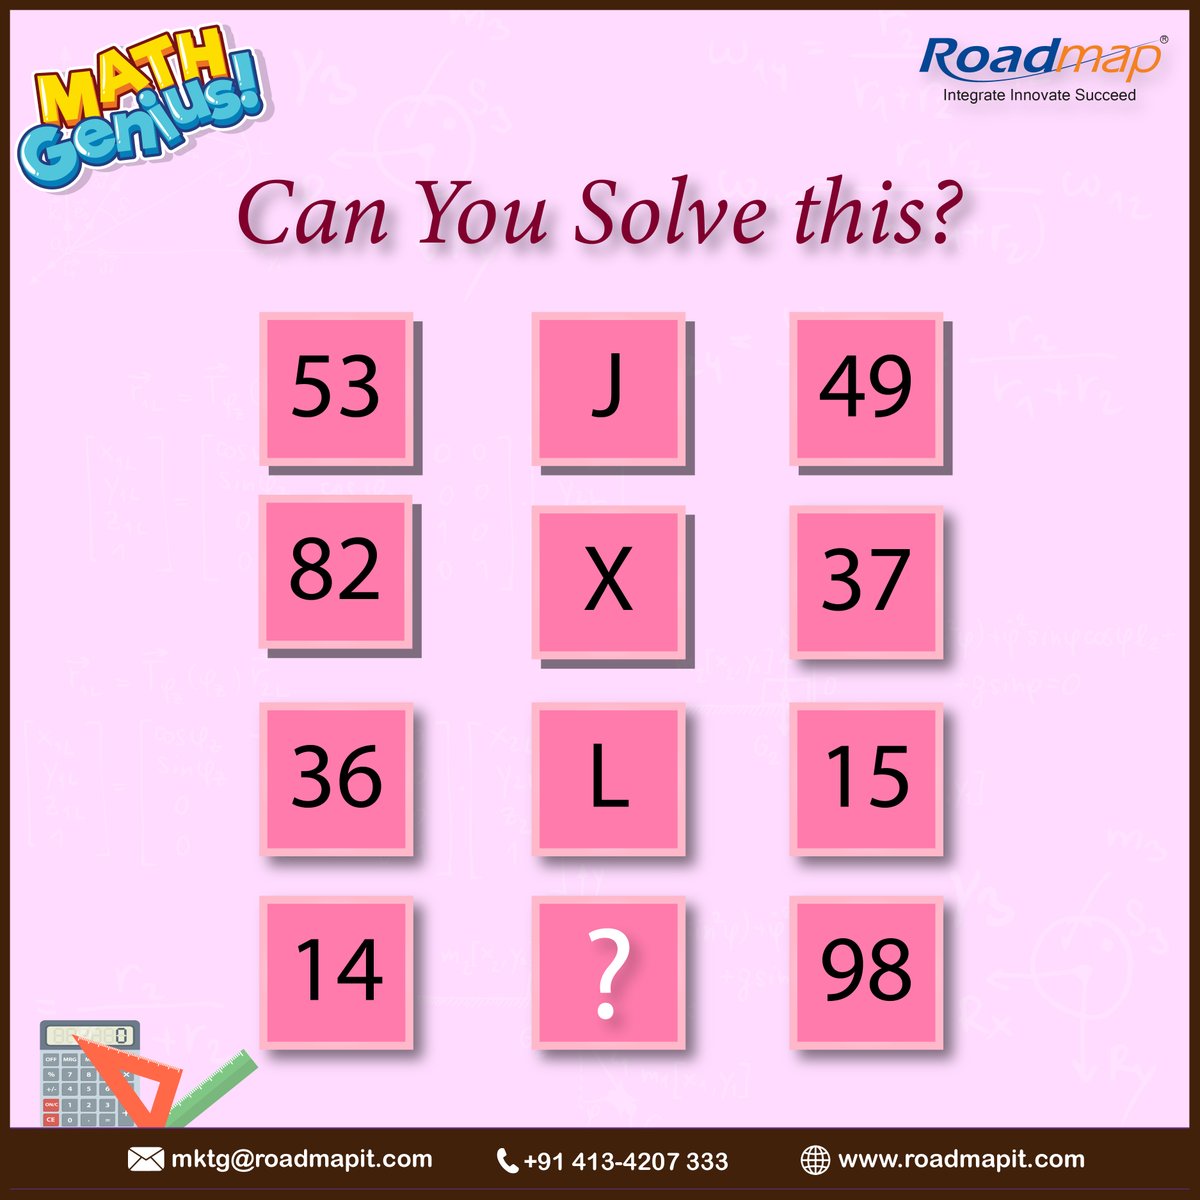 Are you ready for the challenge ??
Only mastermind can solve this within 30 secs.
Tag a friend who enjoys the challenge. Post your answer in the comment section.

#puzzleoftheday #mathspuzzle #puzzle  #brainexercise #mathschallenge #saturdaypuzzle #mathsfun #mathsquizzes